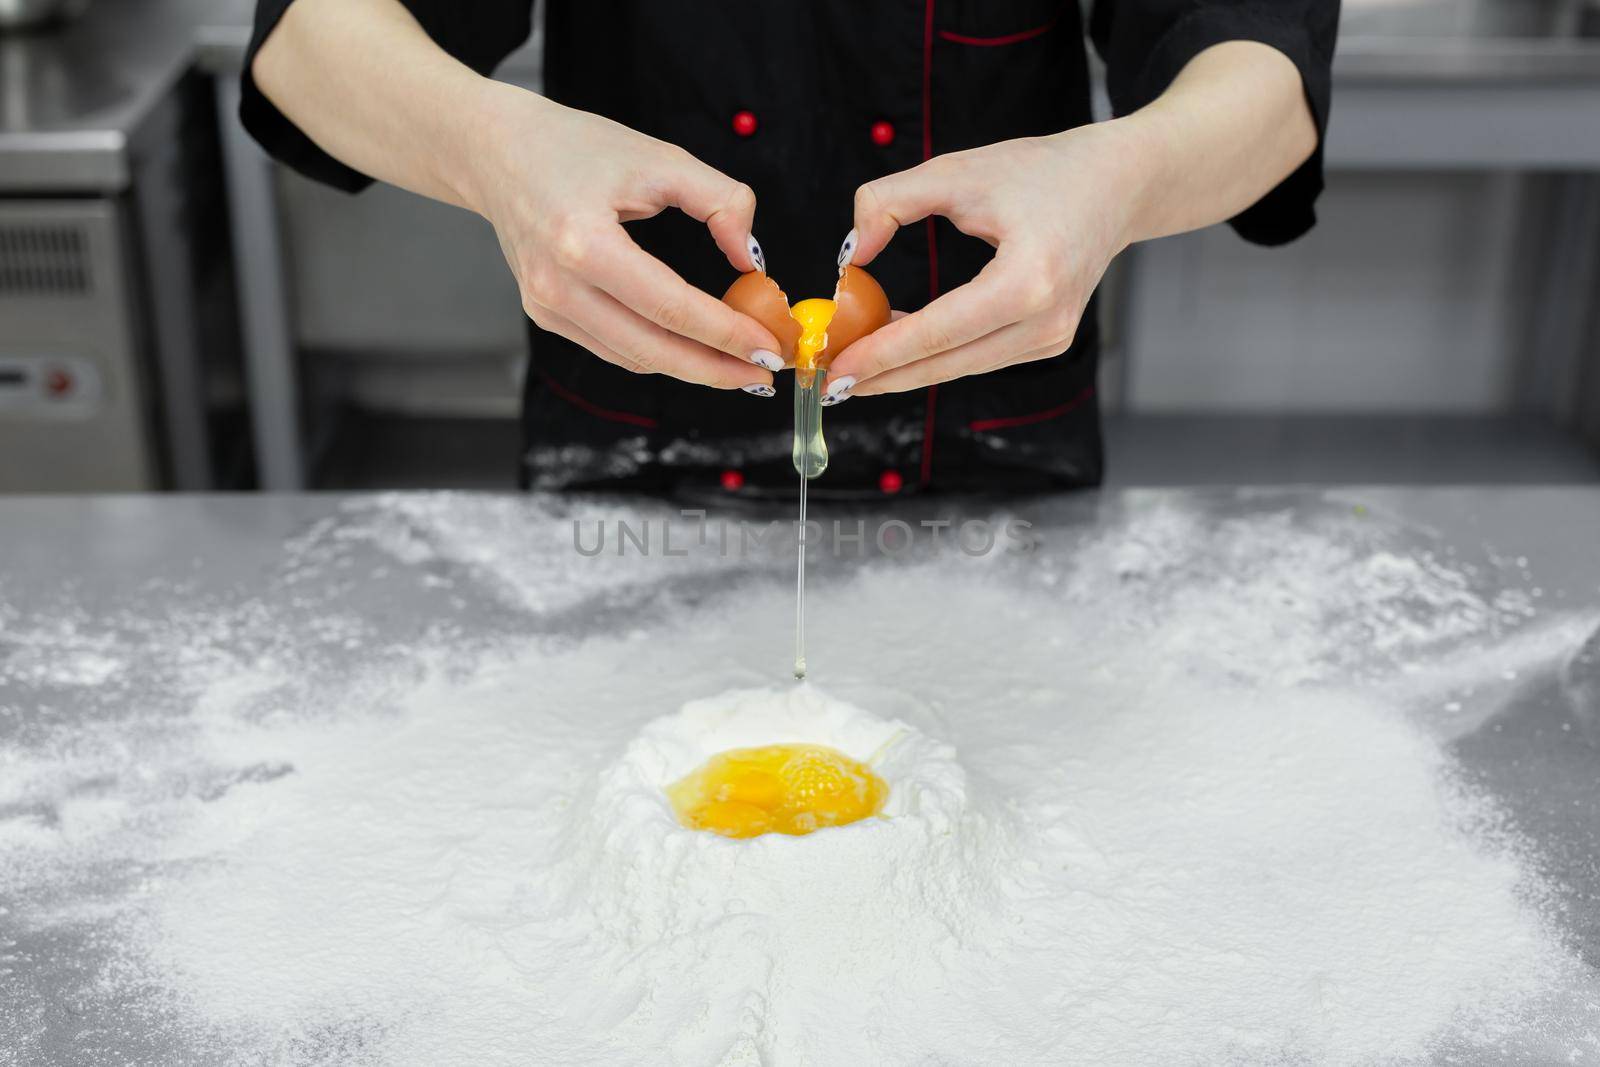 Pastry chef cracking an egg over white flour